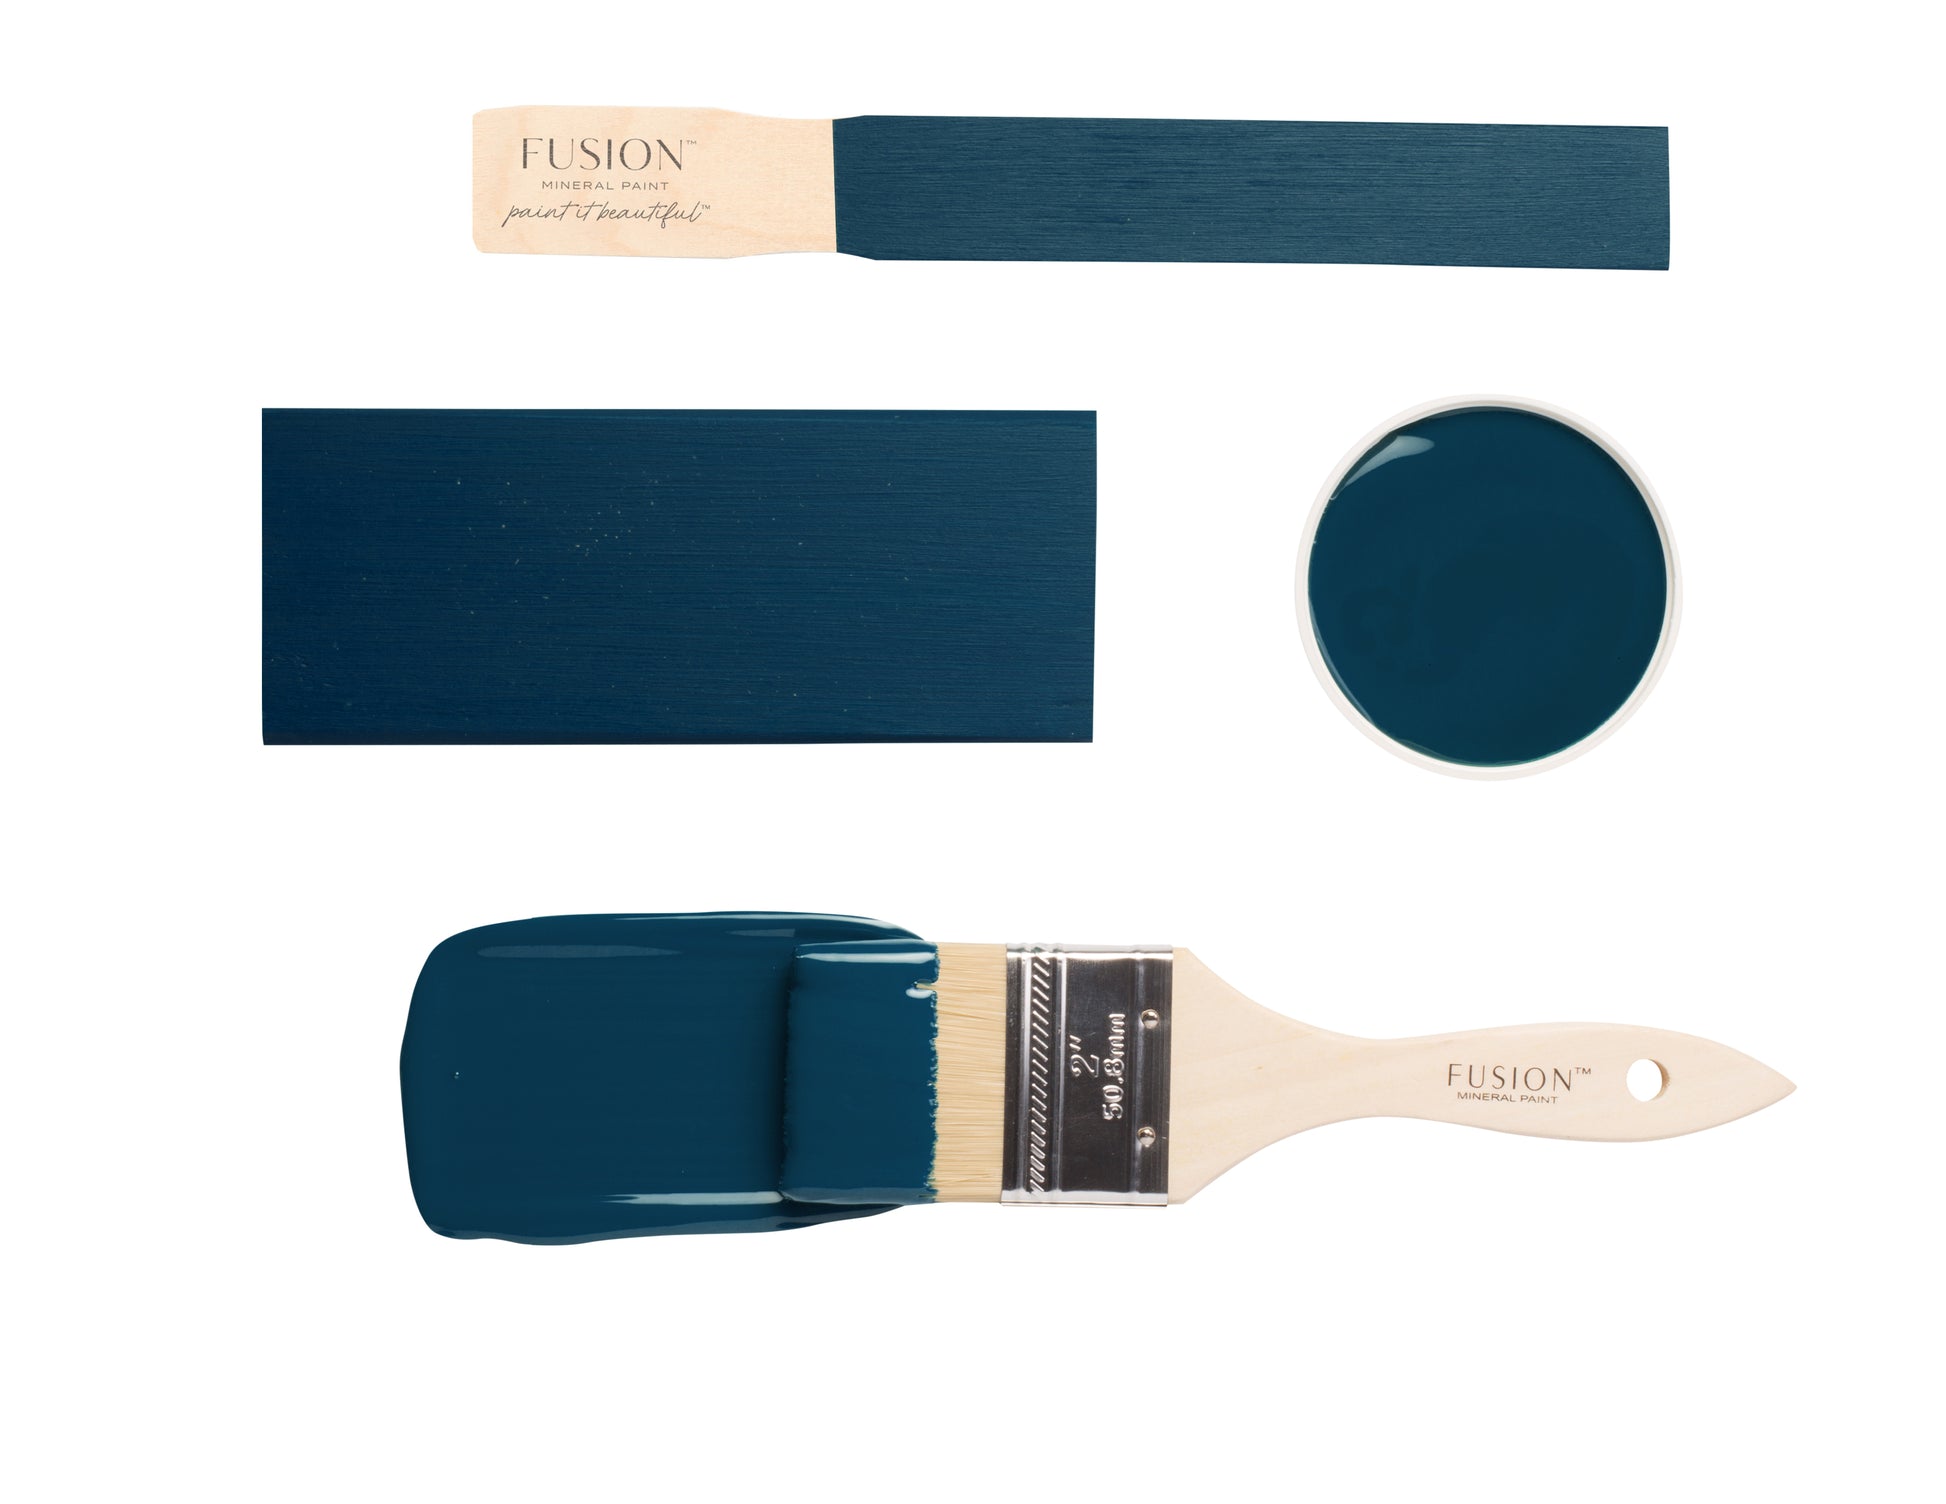 Fusion Willowbank Paint Pint Fusion Mineral Paint Navy Blue Furniture and  Cabinet Paint No Wax Eco Friendly Quick Shipping 